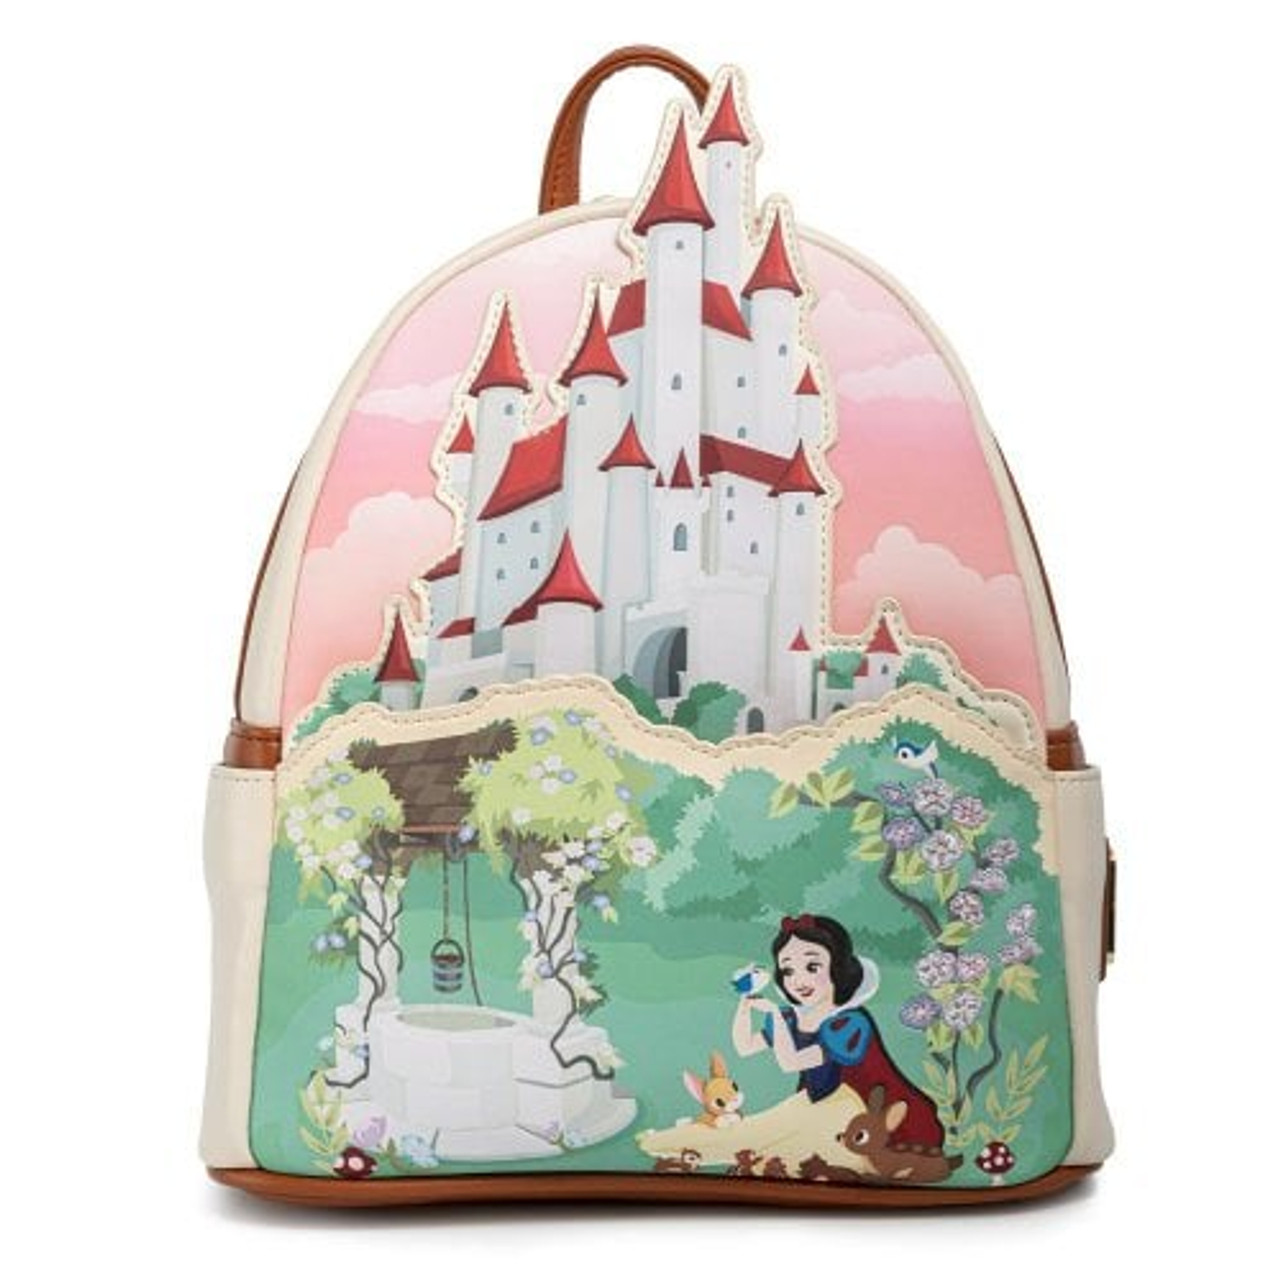 Buy Snow White Evil Queen Throne Mini Backpack at Loungefly.